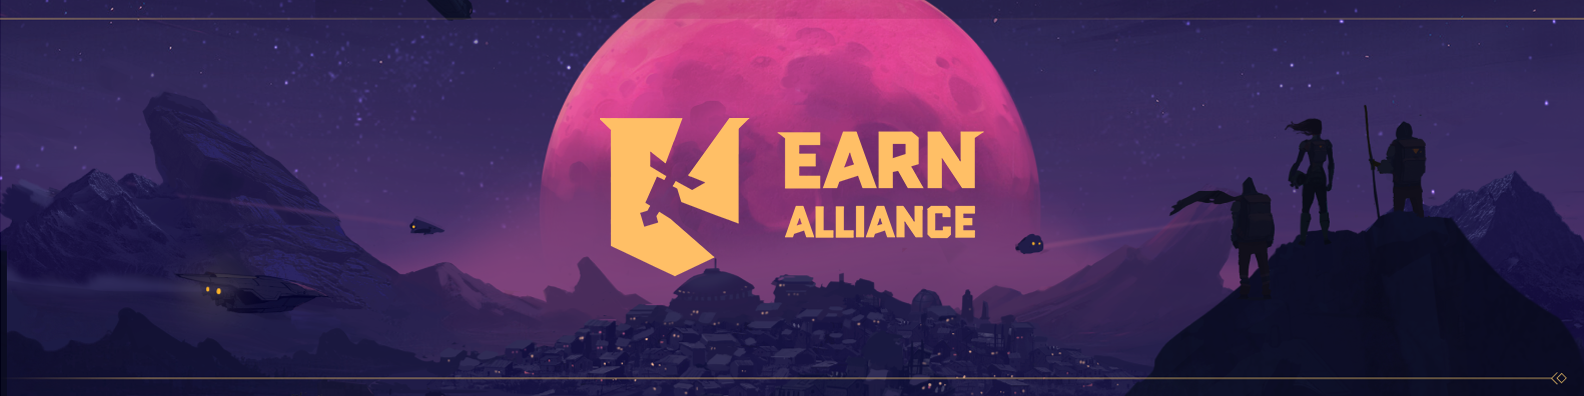 , Gaming Discovery Platform Earn Alliance Announces Team Expansion